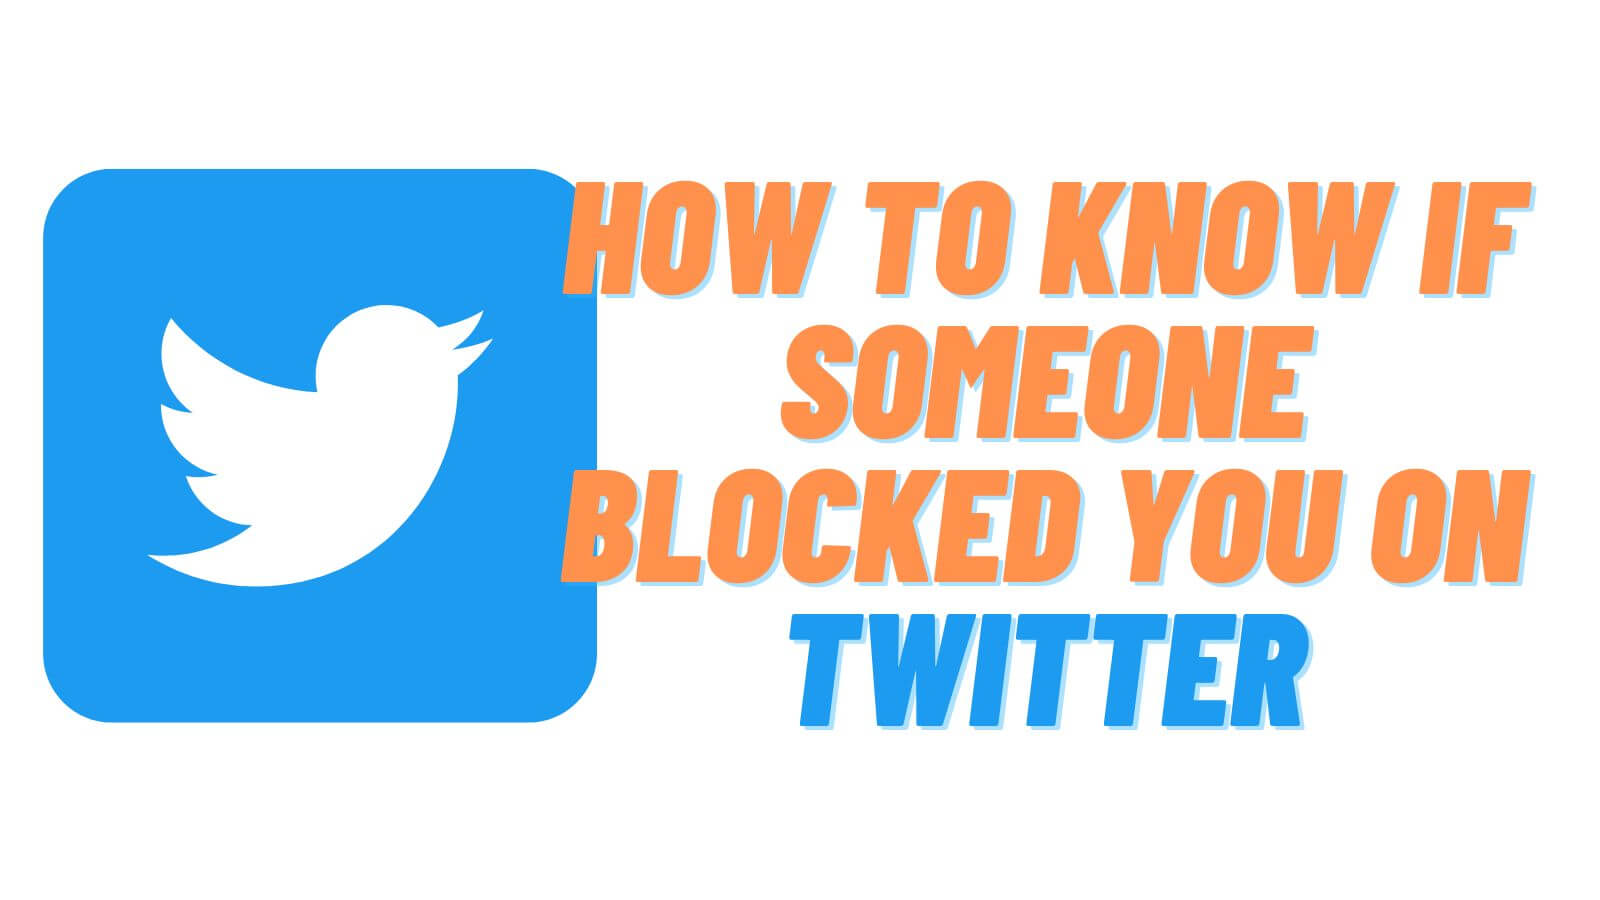 How to Know If Someone Blocked You on Twitter